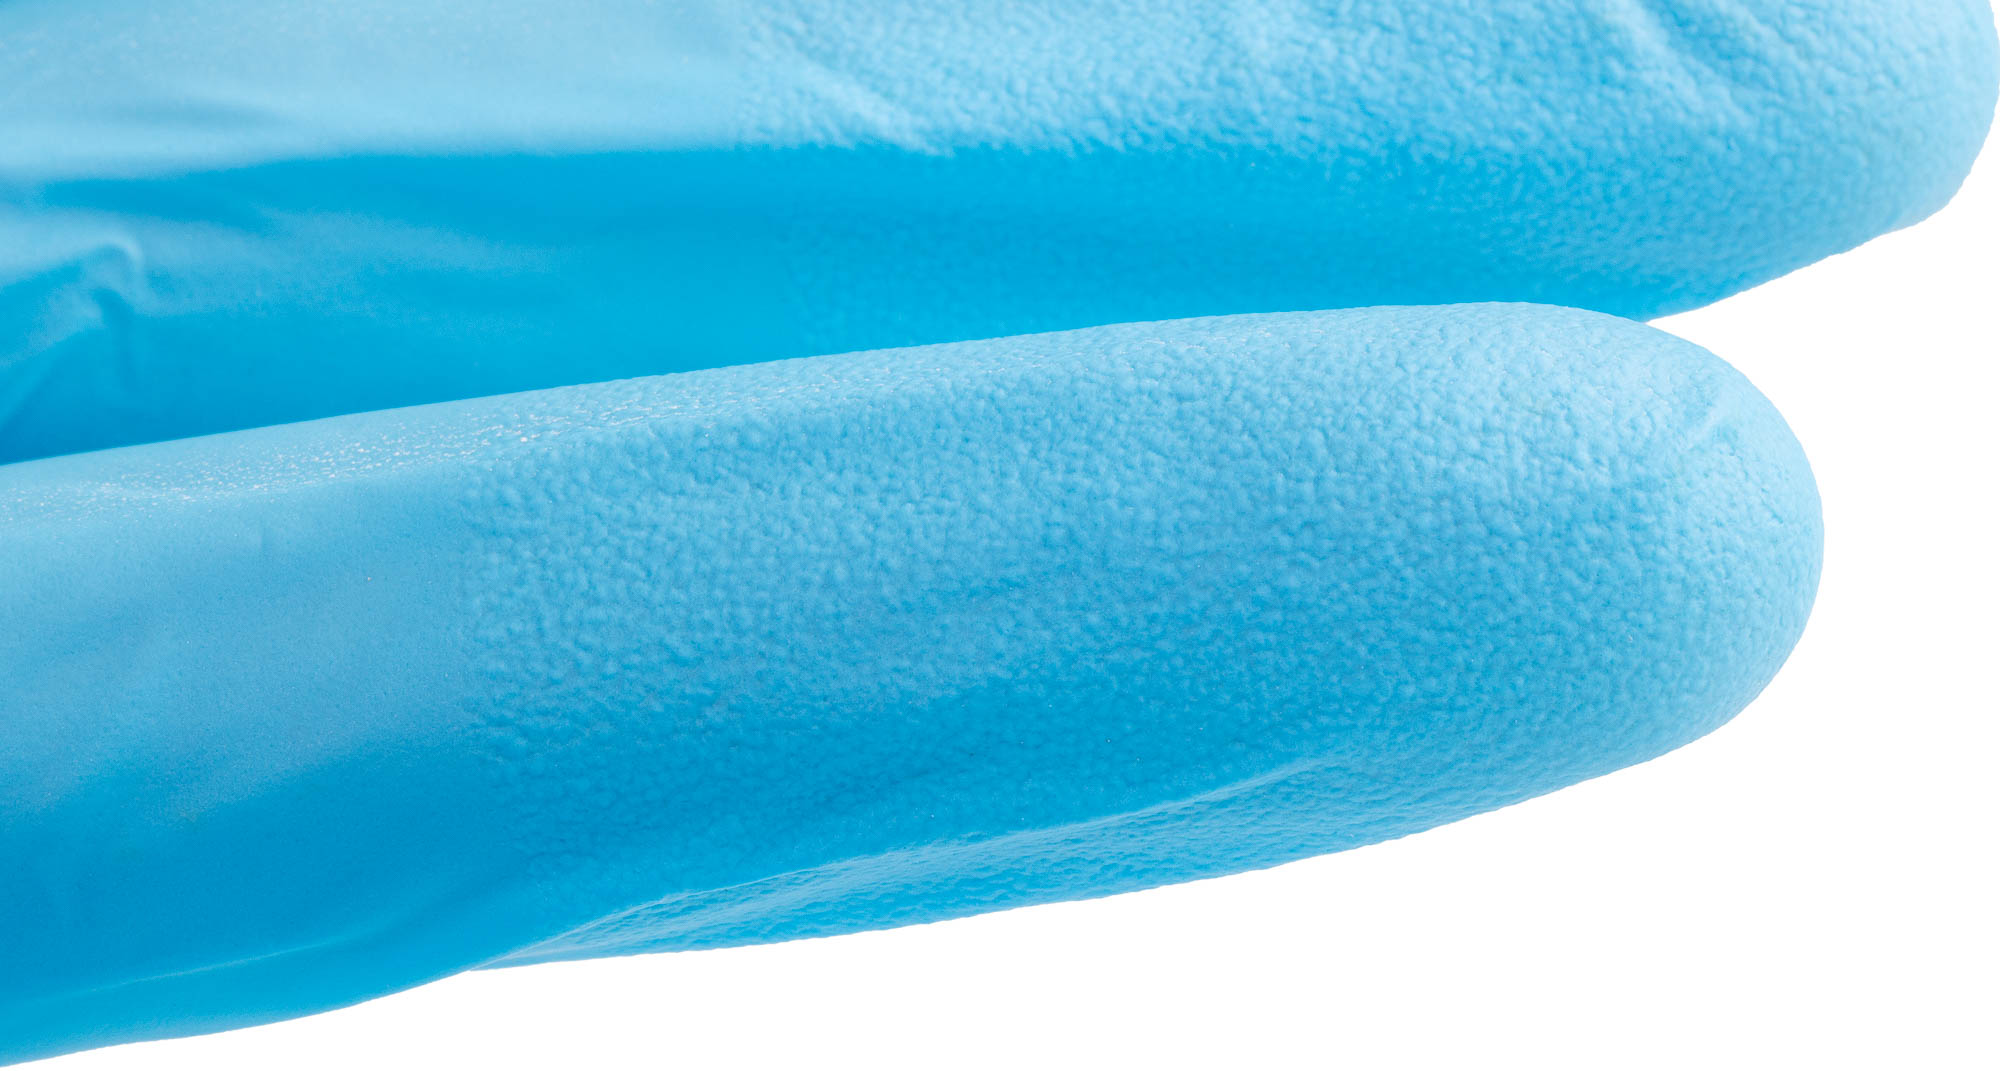 Pro Clean Blue Glove texture closeup - Sample of advertising product photography